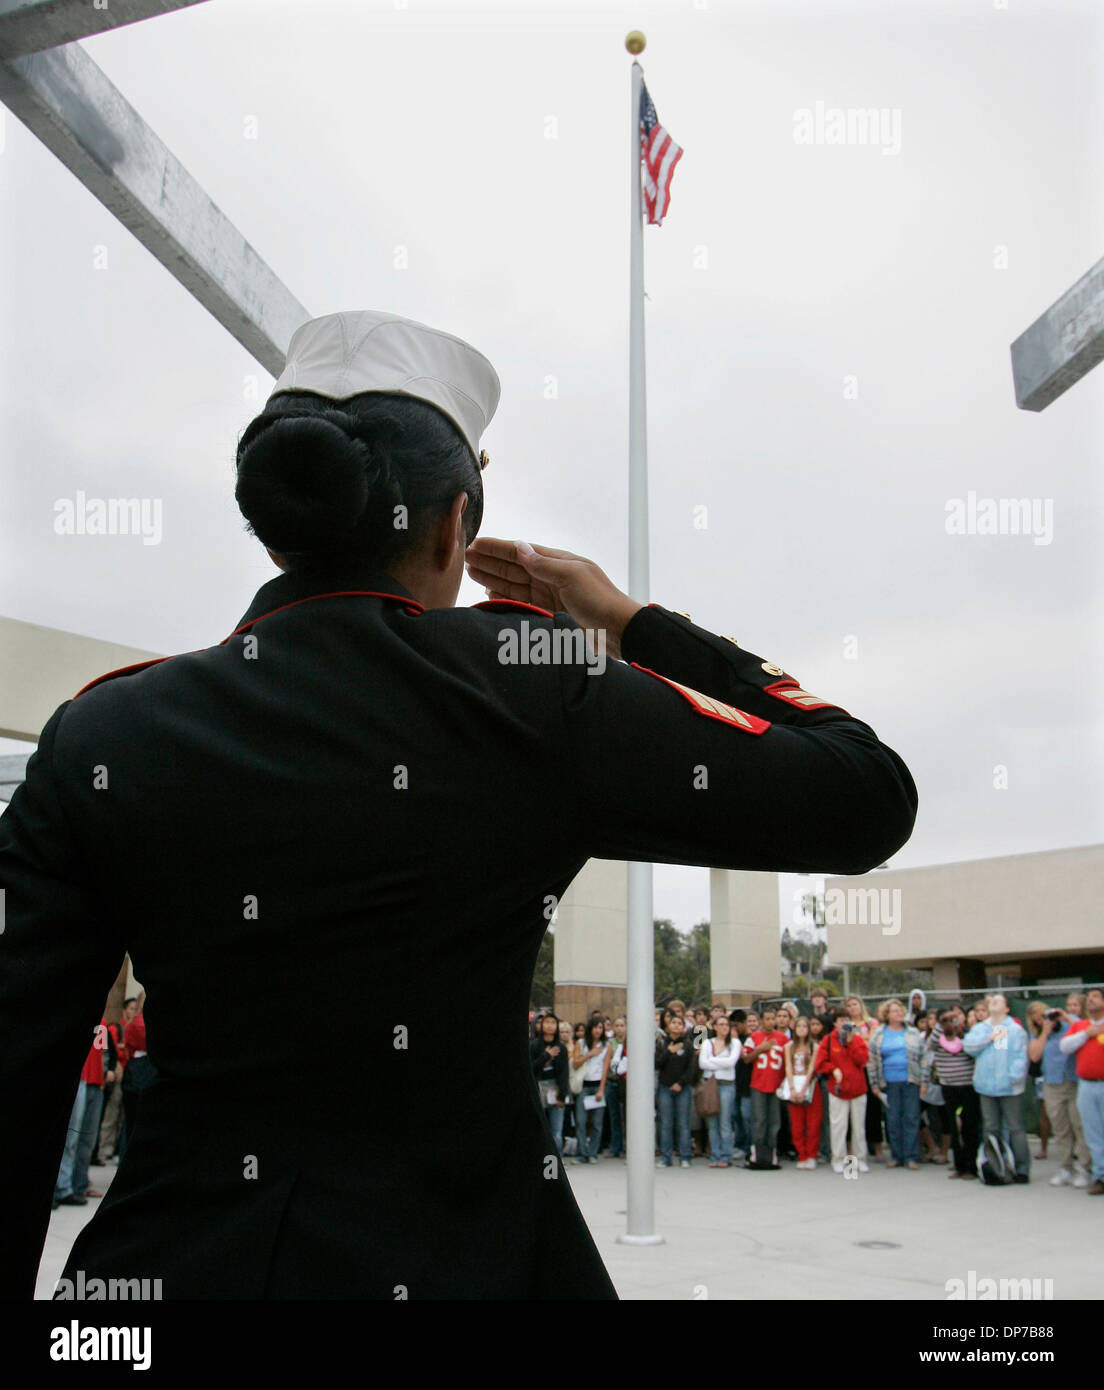 Nov 09, 2006; Rancho Penasquitos, CA, USA; Marine Sgt. VICTORIA ETIENNE salutes the flag which was flown over Camp Eggers in Kabul, Afghanistan on Sept. 11 of this year, then sent to Mt. Carmel High School teacher and coach Chris Vitous by Lt. Col. David Guzman who was an assistant coach at the school before he was deployed in June. The flag was raised in front of the recently remo Stock Photo